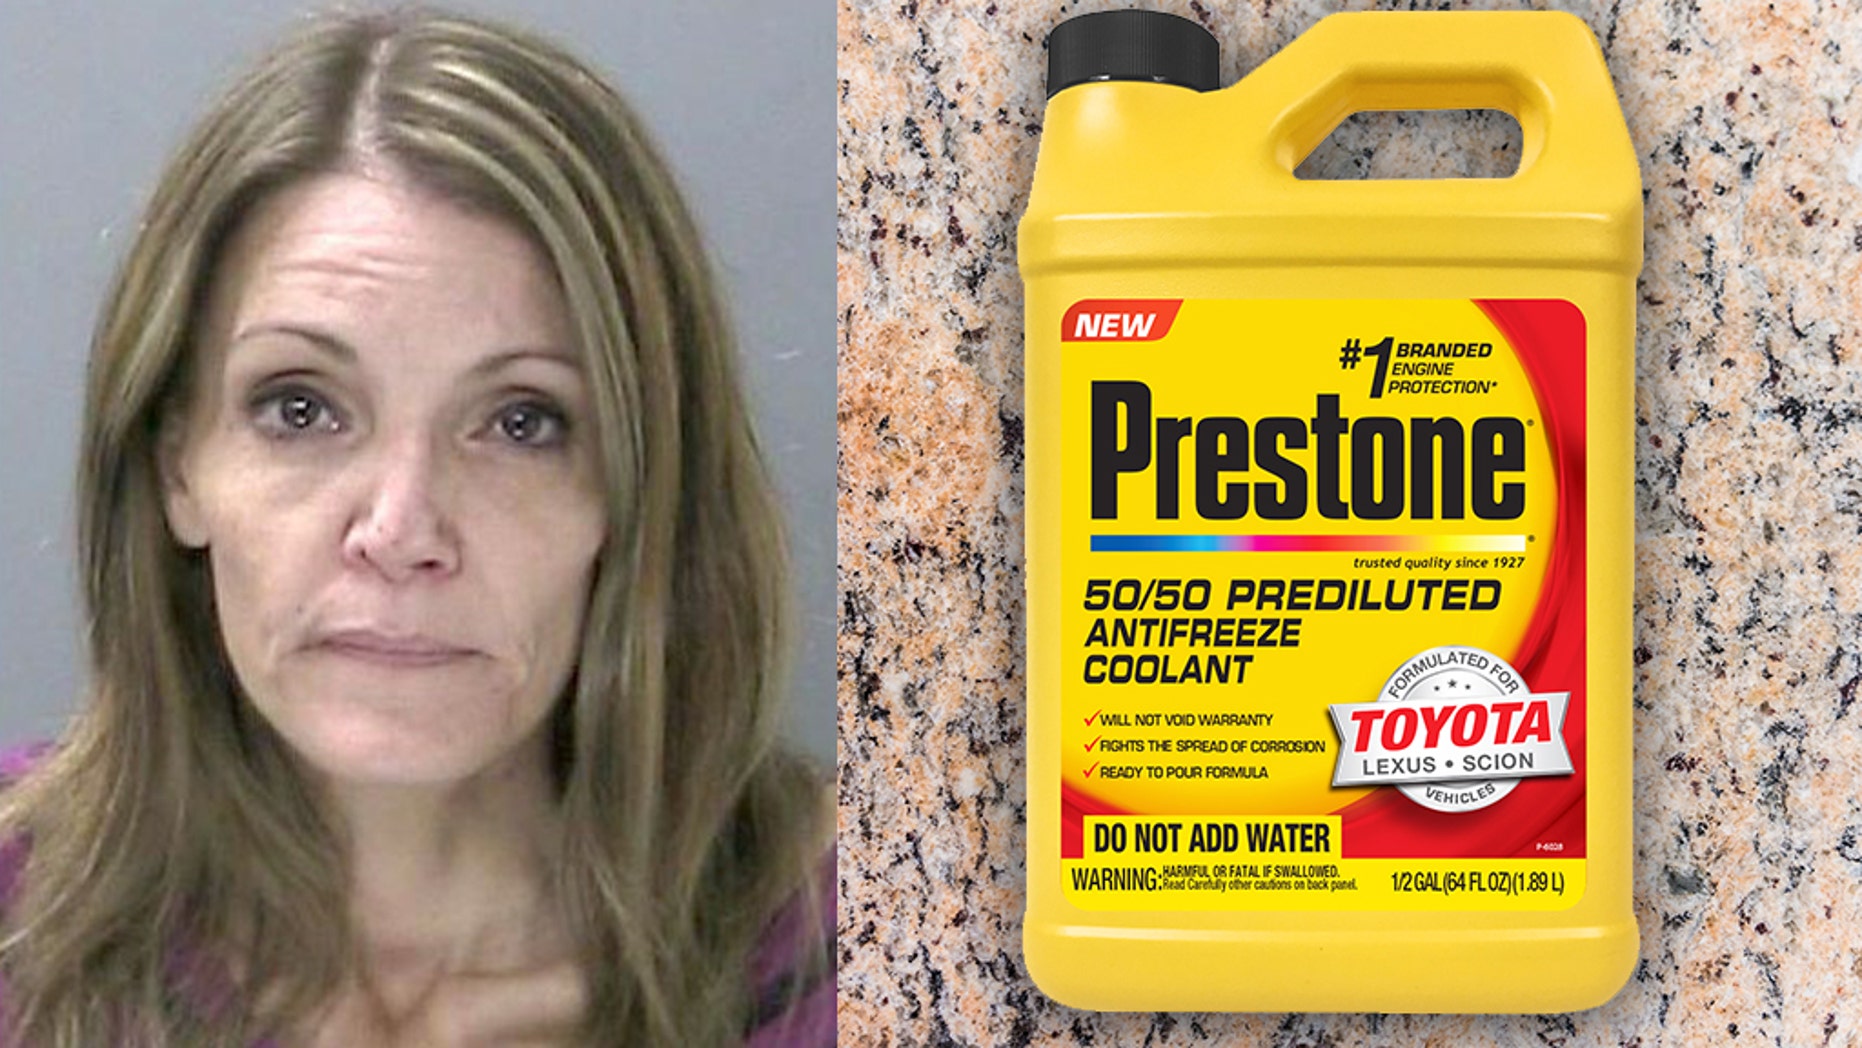 New York woman tried to poison estranged husband with antifreeze in wine bottles, officials say